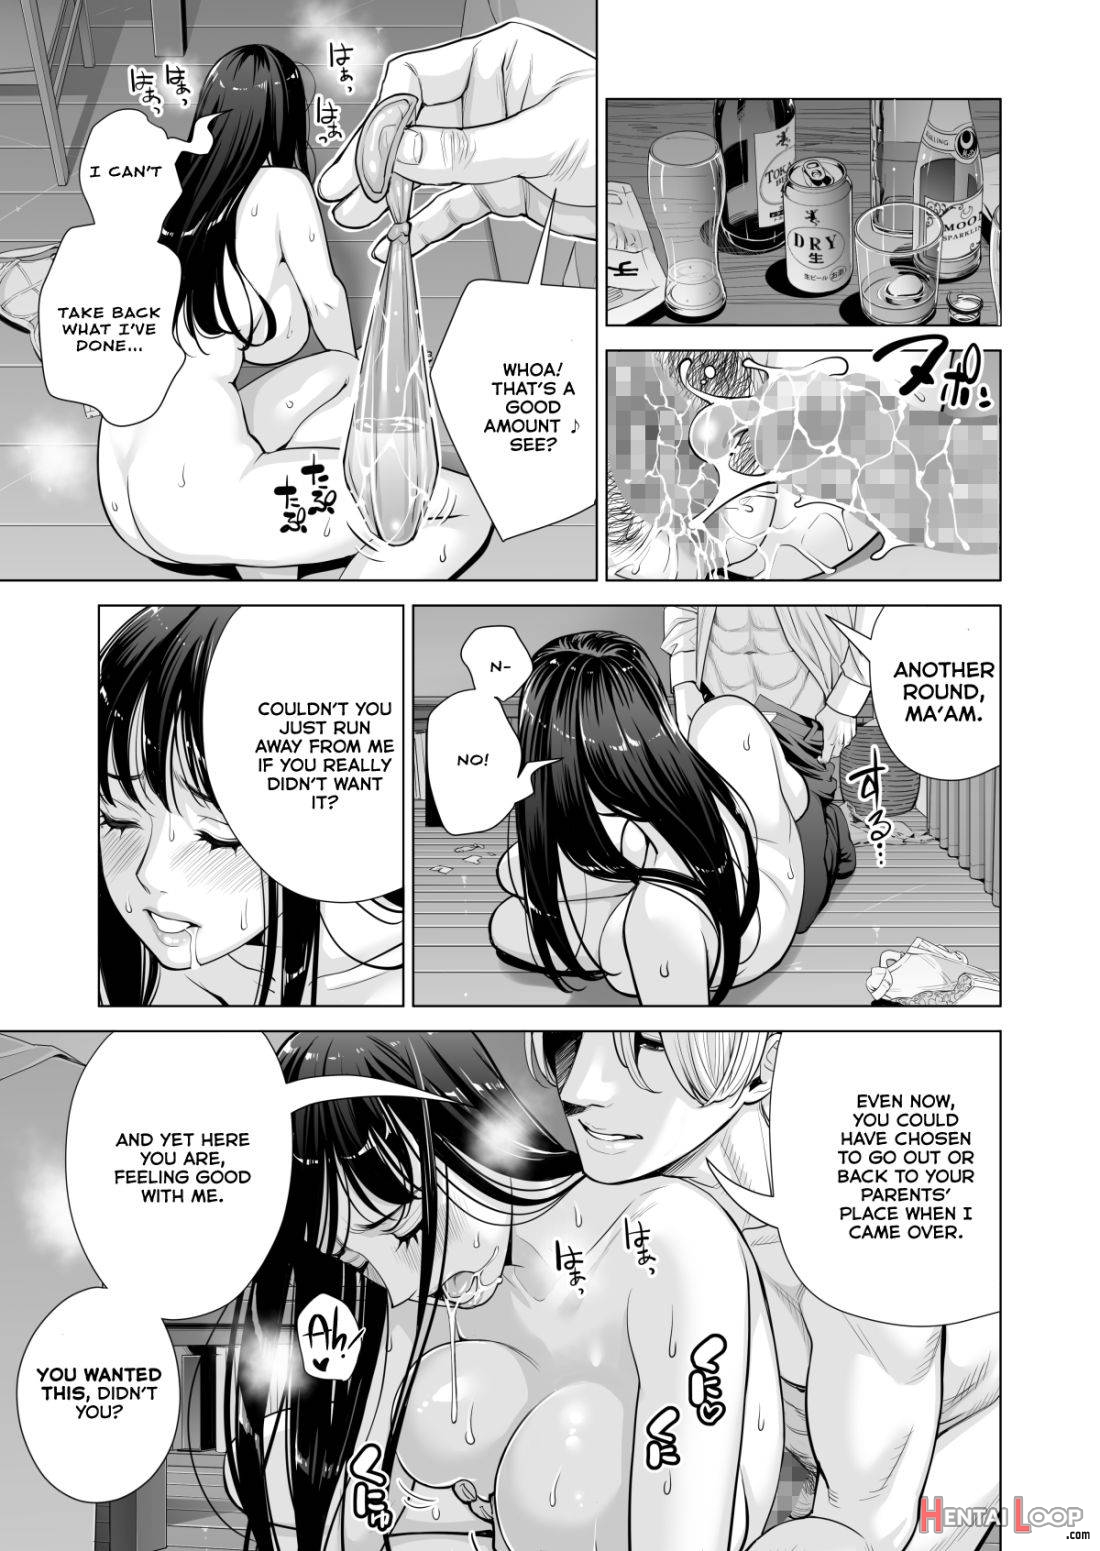 Tsukiyo no Midare Zake (Kouhen) Moonlit Intoxication ~ A Housewife Stolen by a Coworker Besides her Blackout Drunk Husband ~ Chapter 2 page 37